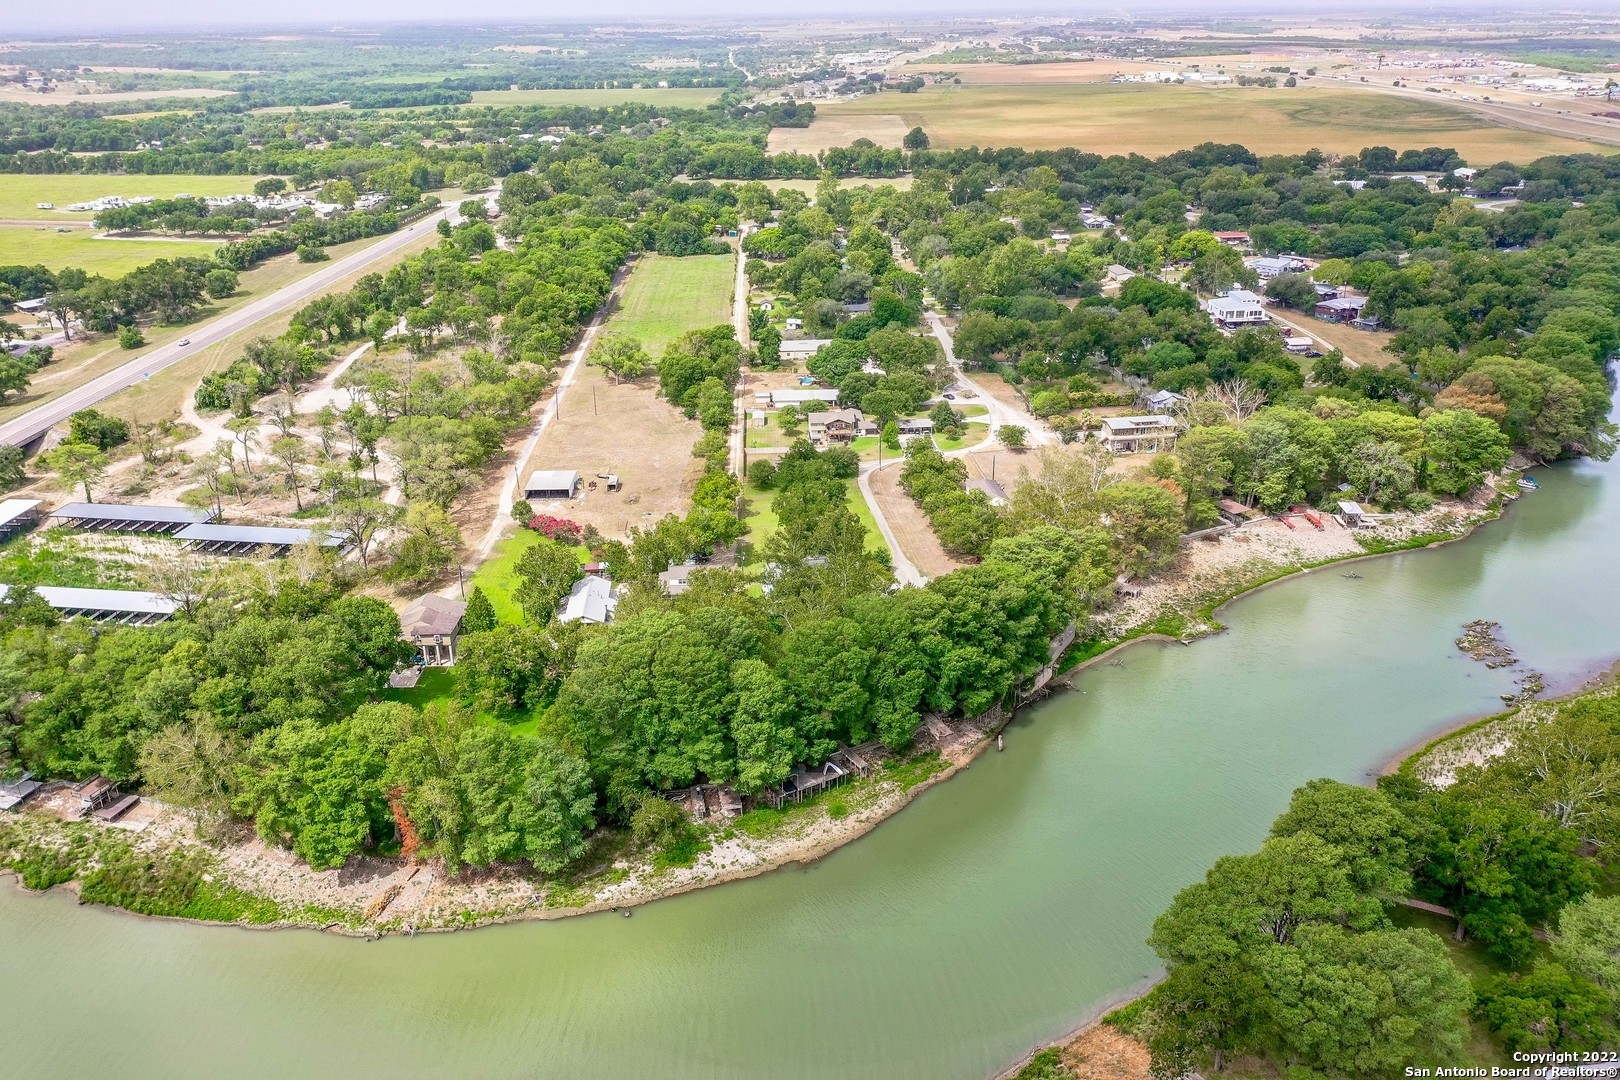 WATERFRONT LAKE PLACID 2-story home w/ private road gated access off Reiley Rd & approx. 60' of river front access w/ 2 docks along the Guadalupe River.  Home was lifted in 2019 above flood level FEMA recommended contractor (see attached documentation). Roof replaced 2018, completely new AC & Septic systems installed in 2019.  Approx. 800sf detached metal garage shop.  Reside full time on the river, great weekend hideaway or short / long term rental, the possibilities are endless!